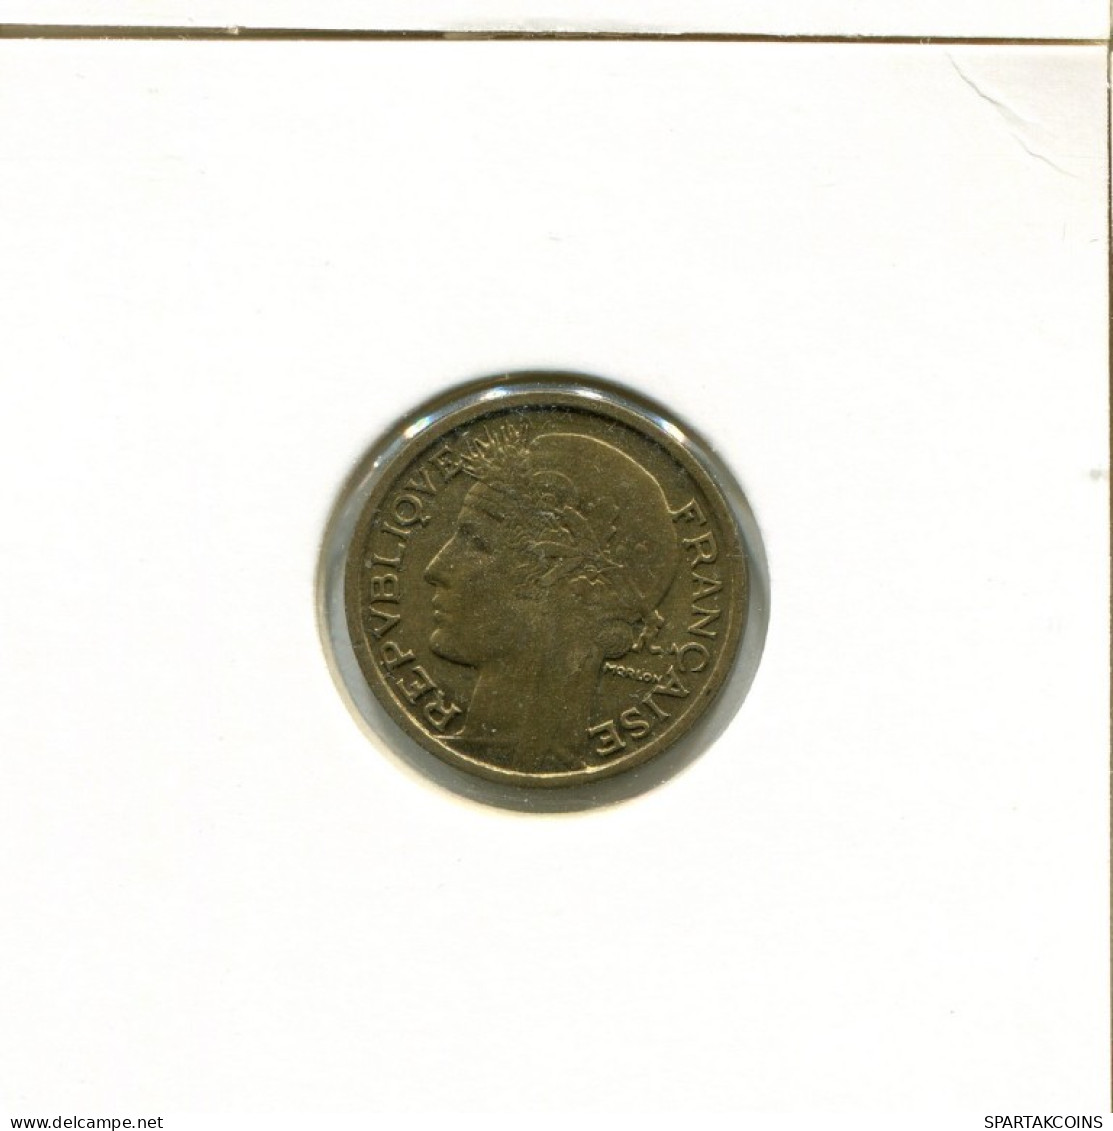 50 CENTIMES 1937 FRANCE French Coin #AK926.U.A - 50 Centimes